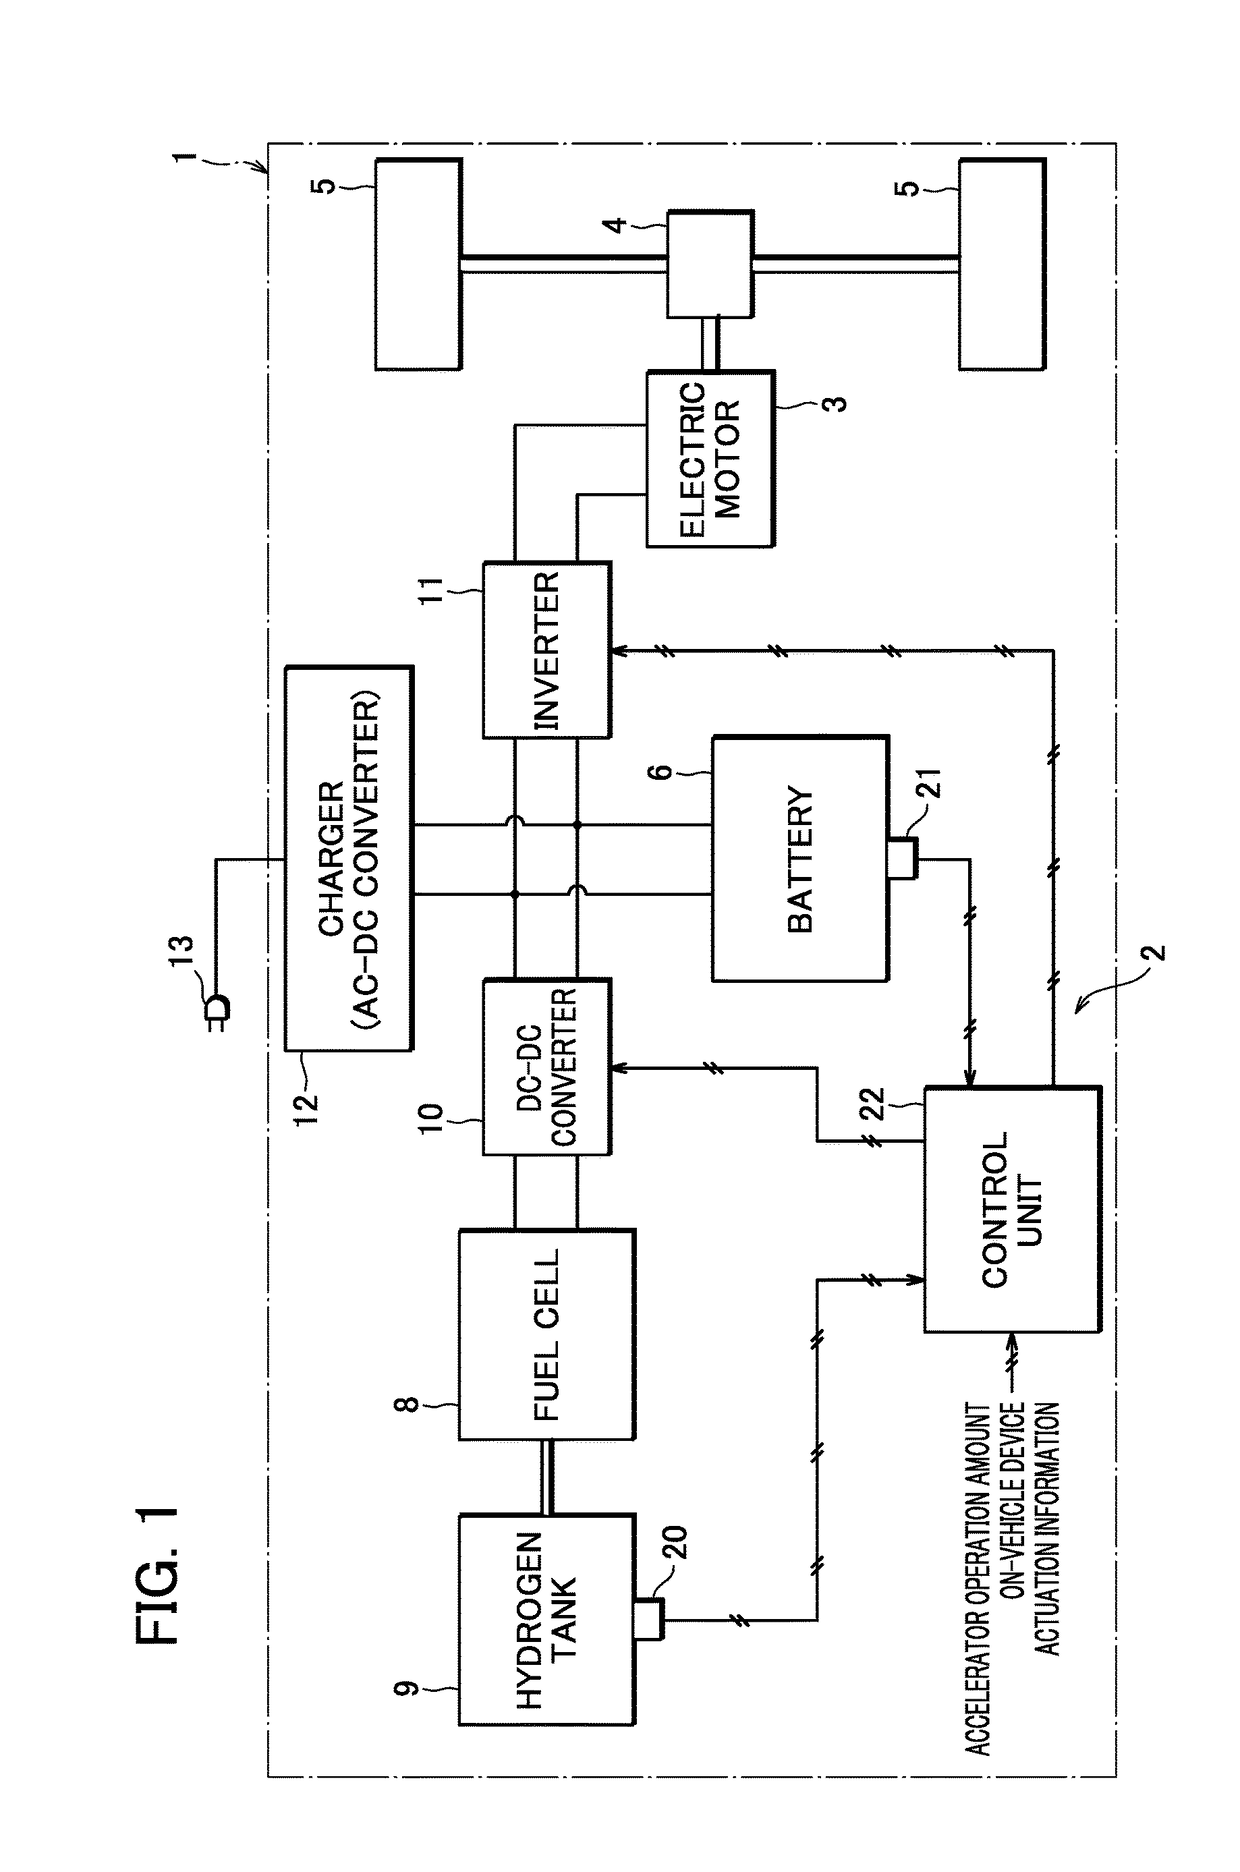 Power control device for vehicle